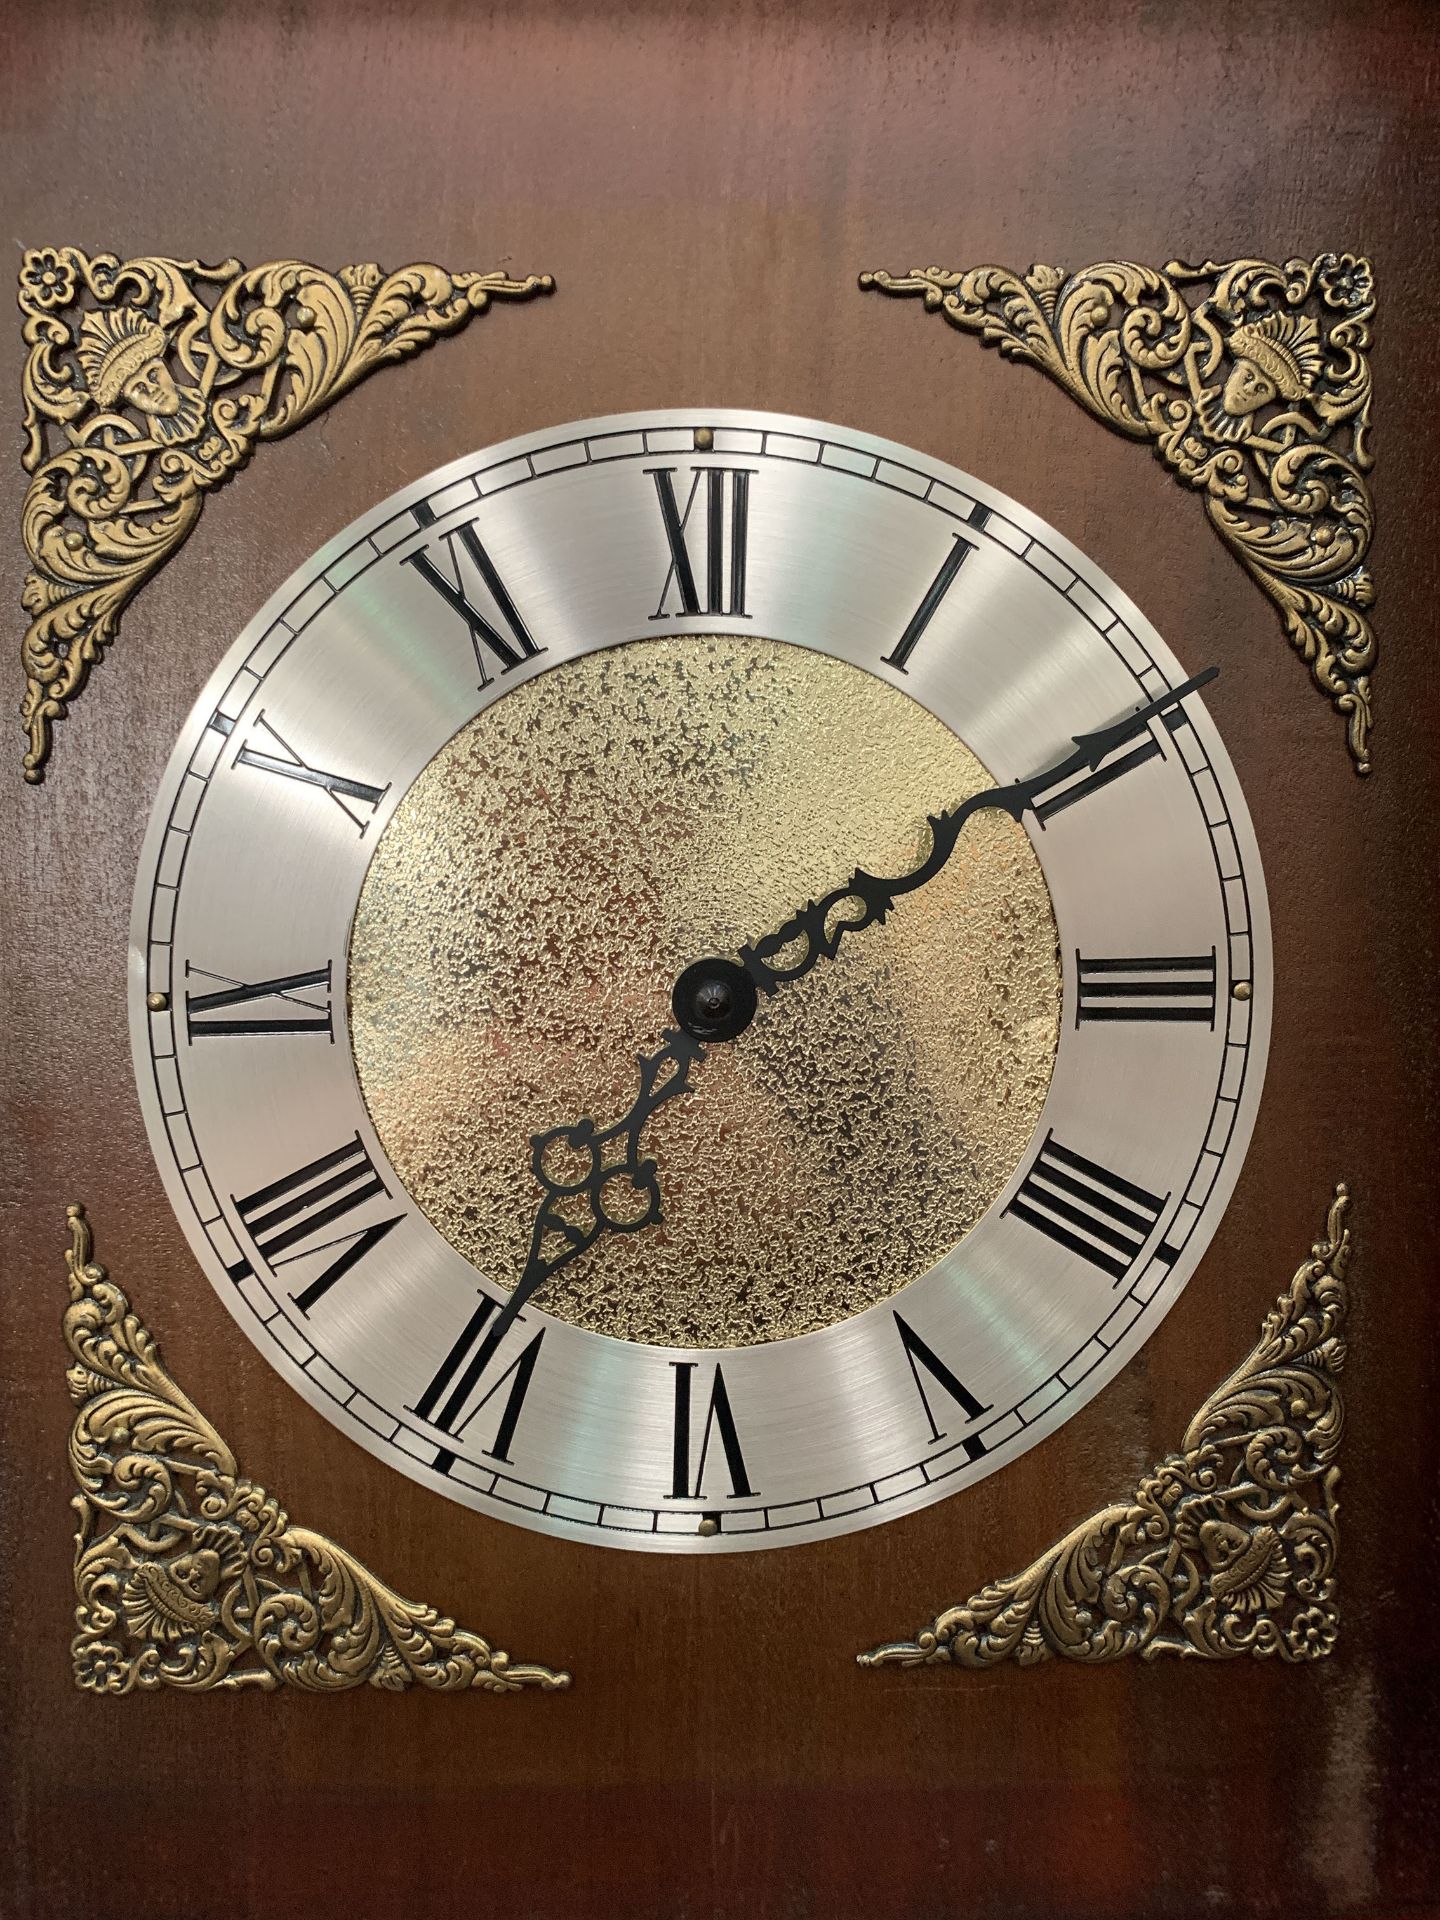 Mahogany Grandfather Clock with Ornate Face Featuring Roman Numerals - Image 3 of 4